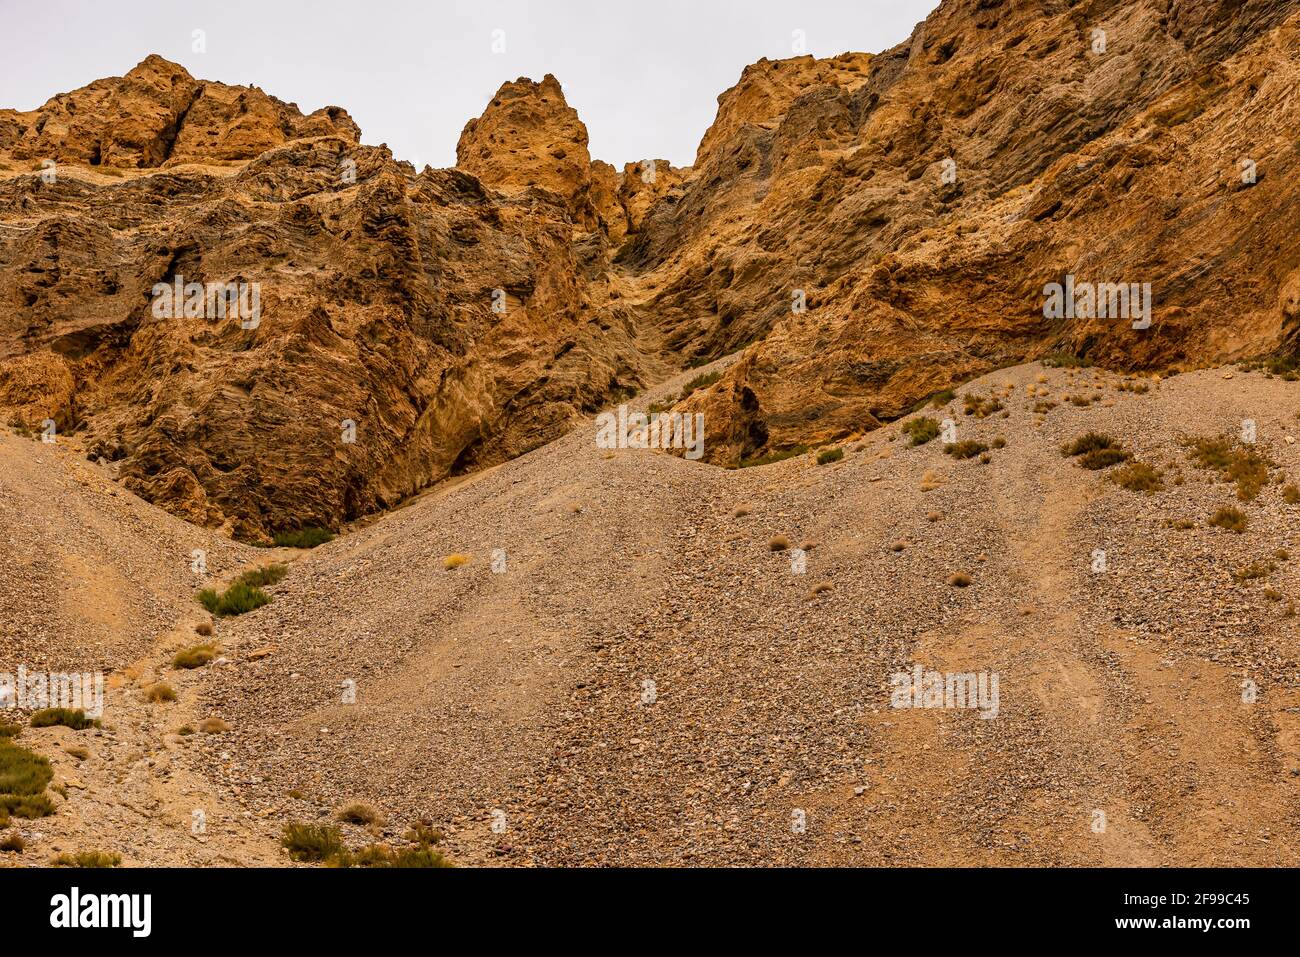 Wind eroded landscape in arid cold desert of Lahaul Spiti in Trans Himalayas. Wind erodes Earth's surface by deflation i.e removal of loose,fine grain Stock Photo